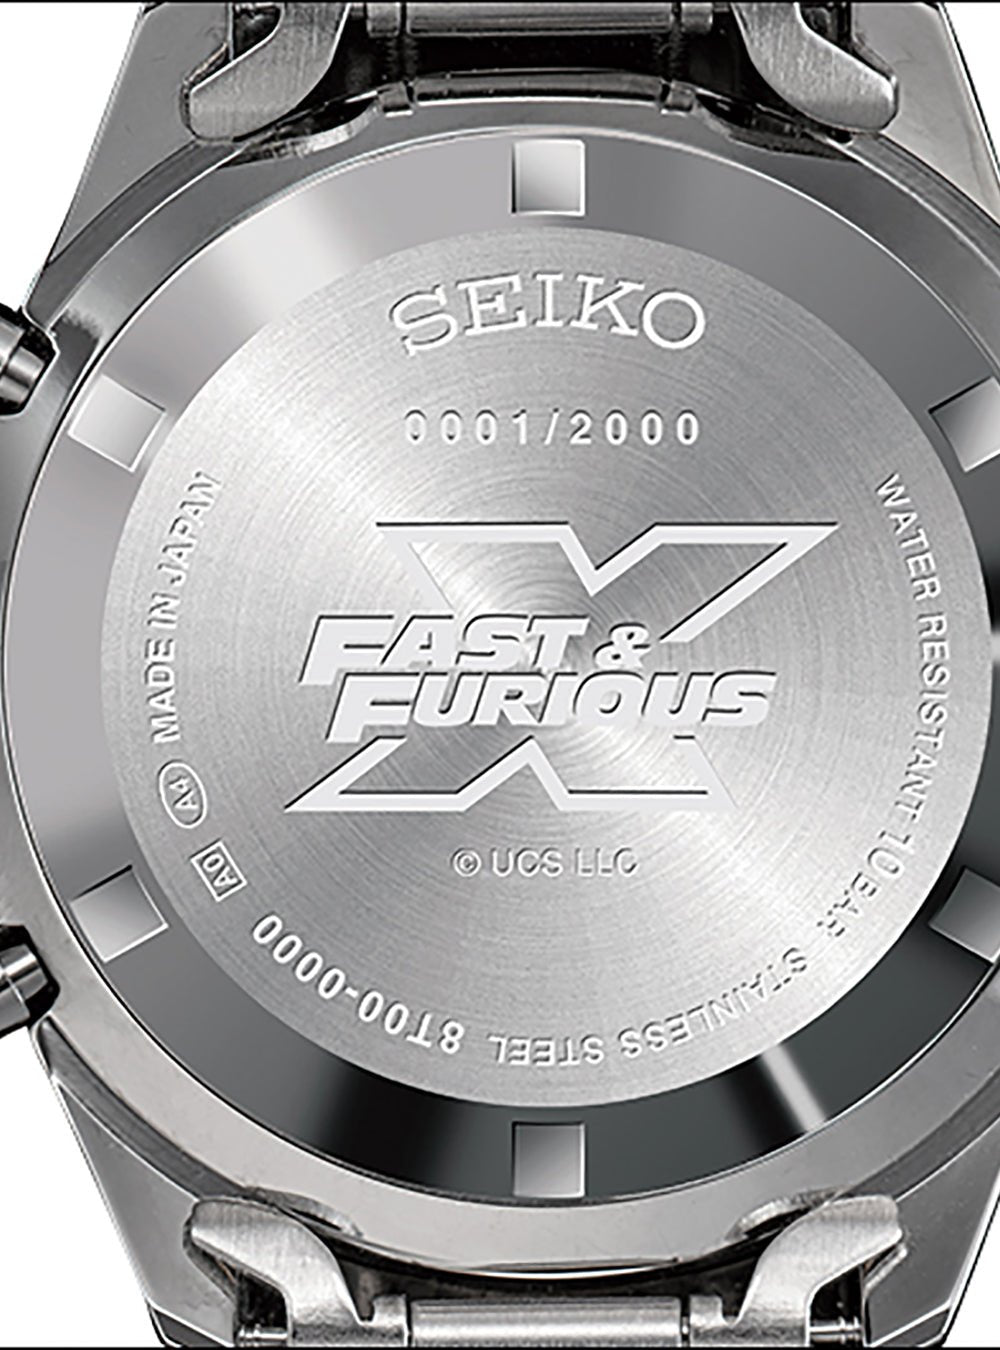 Seiko x Fast & Furious / Fire Boost Collaboration Watch Limited Edition Made in Japan